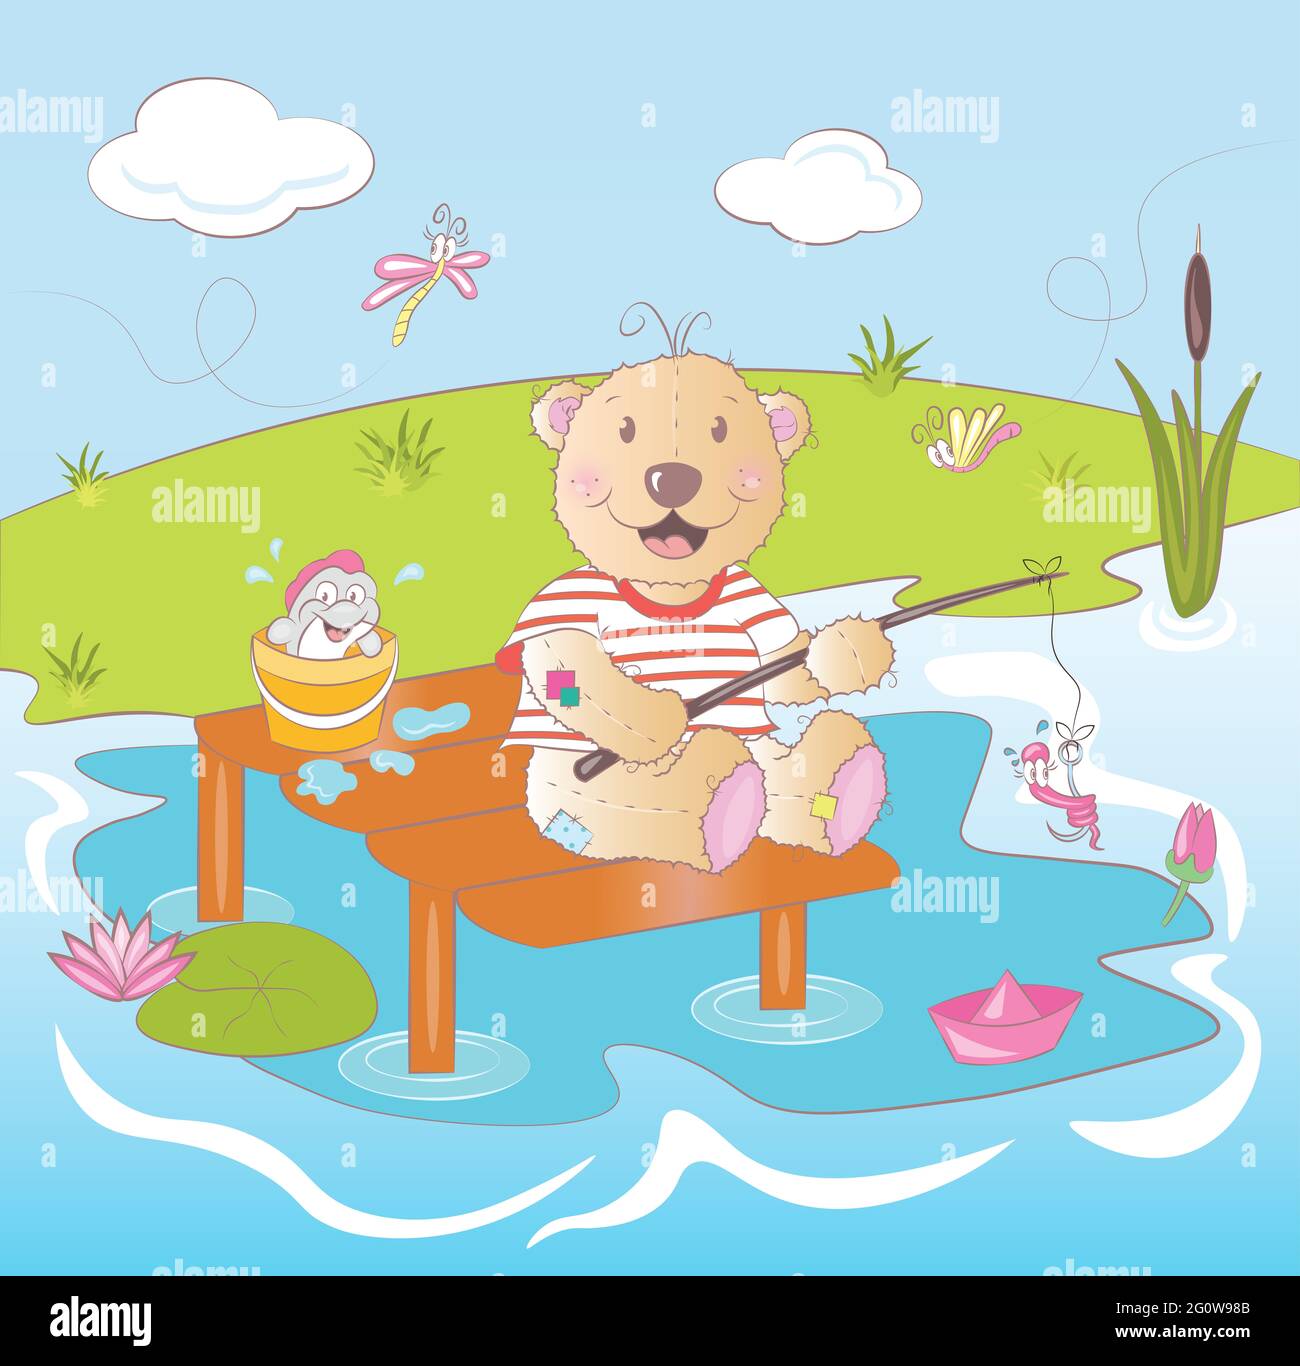 Cute Teddy bear fisherman is sitting and fishing on the lake. Colorful Funny illustration Stock Photo